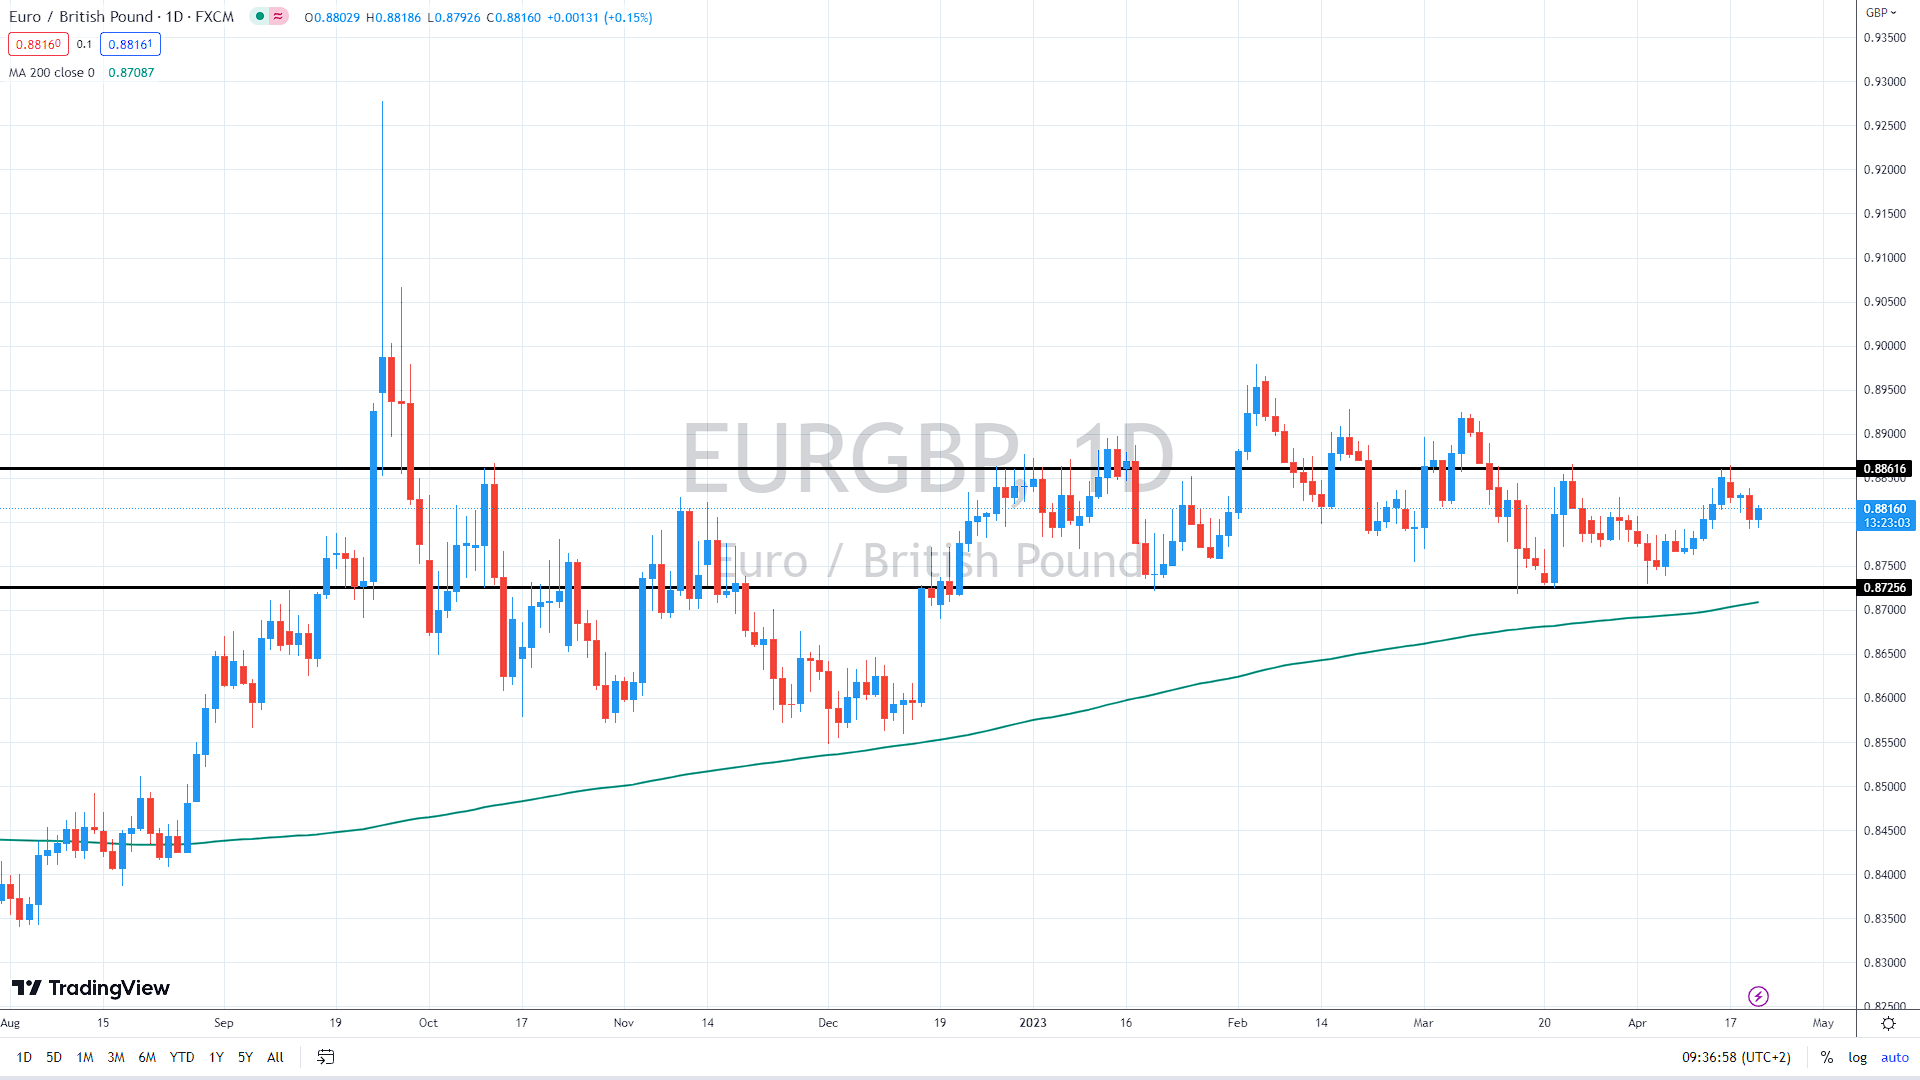 EUR/GBP daily chart